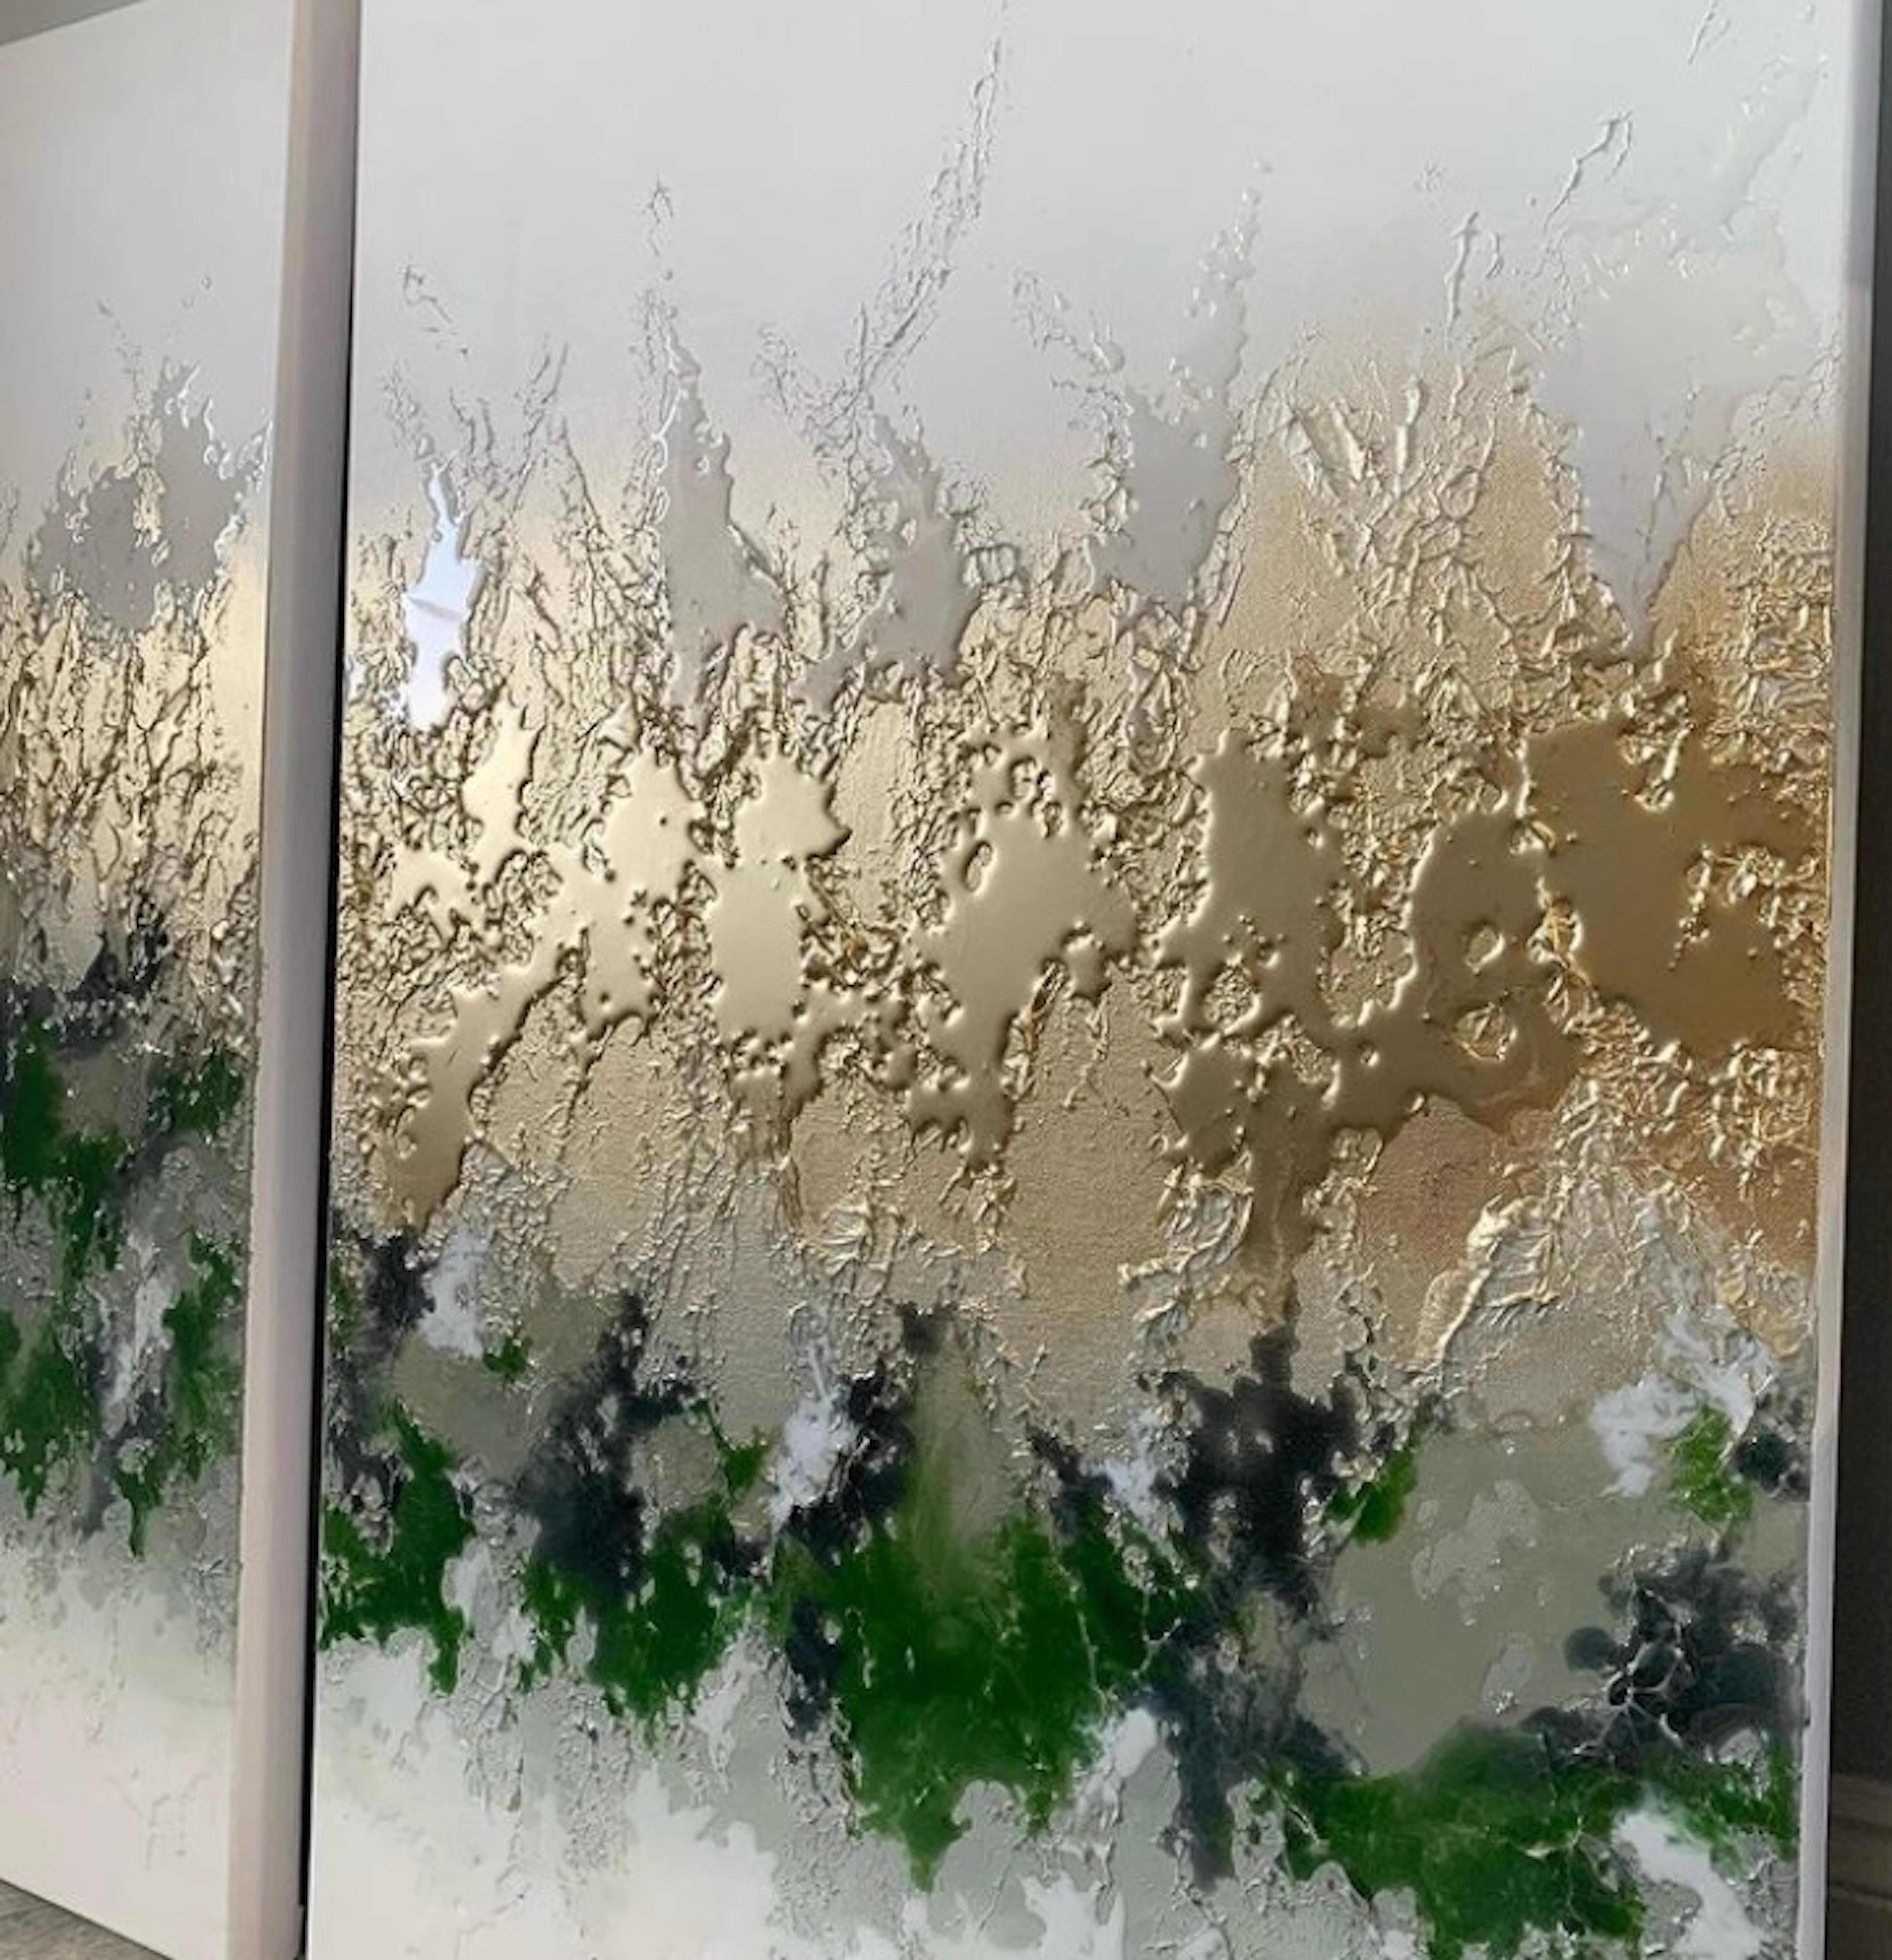 Emerald Gold - Abstract Art Diptych, Contemporary, Abstract, Mixed Media - Painting by Sarah Berger